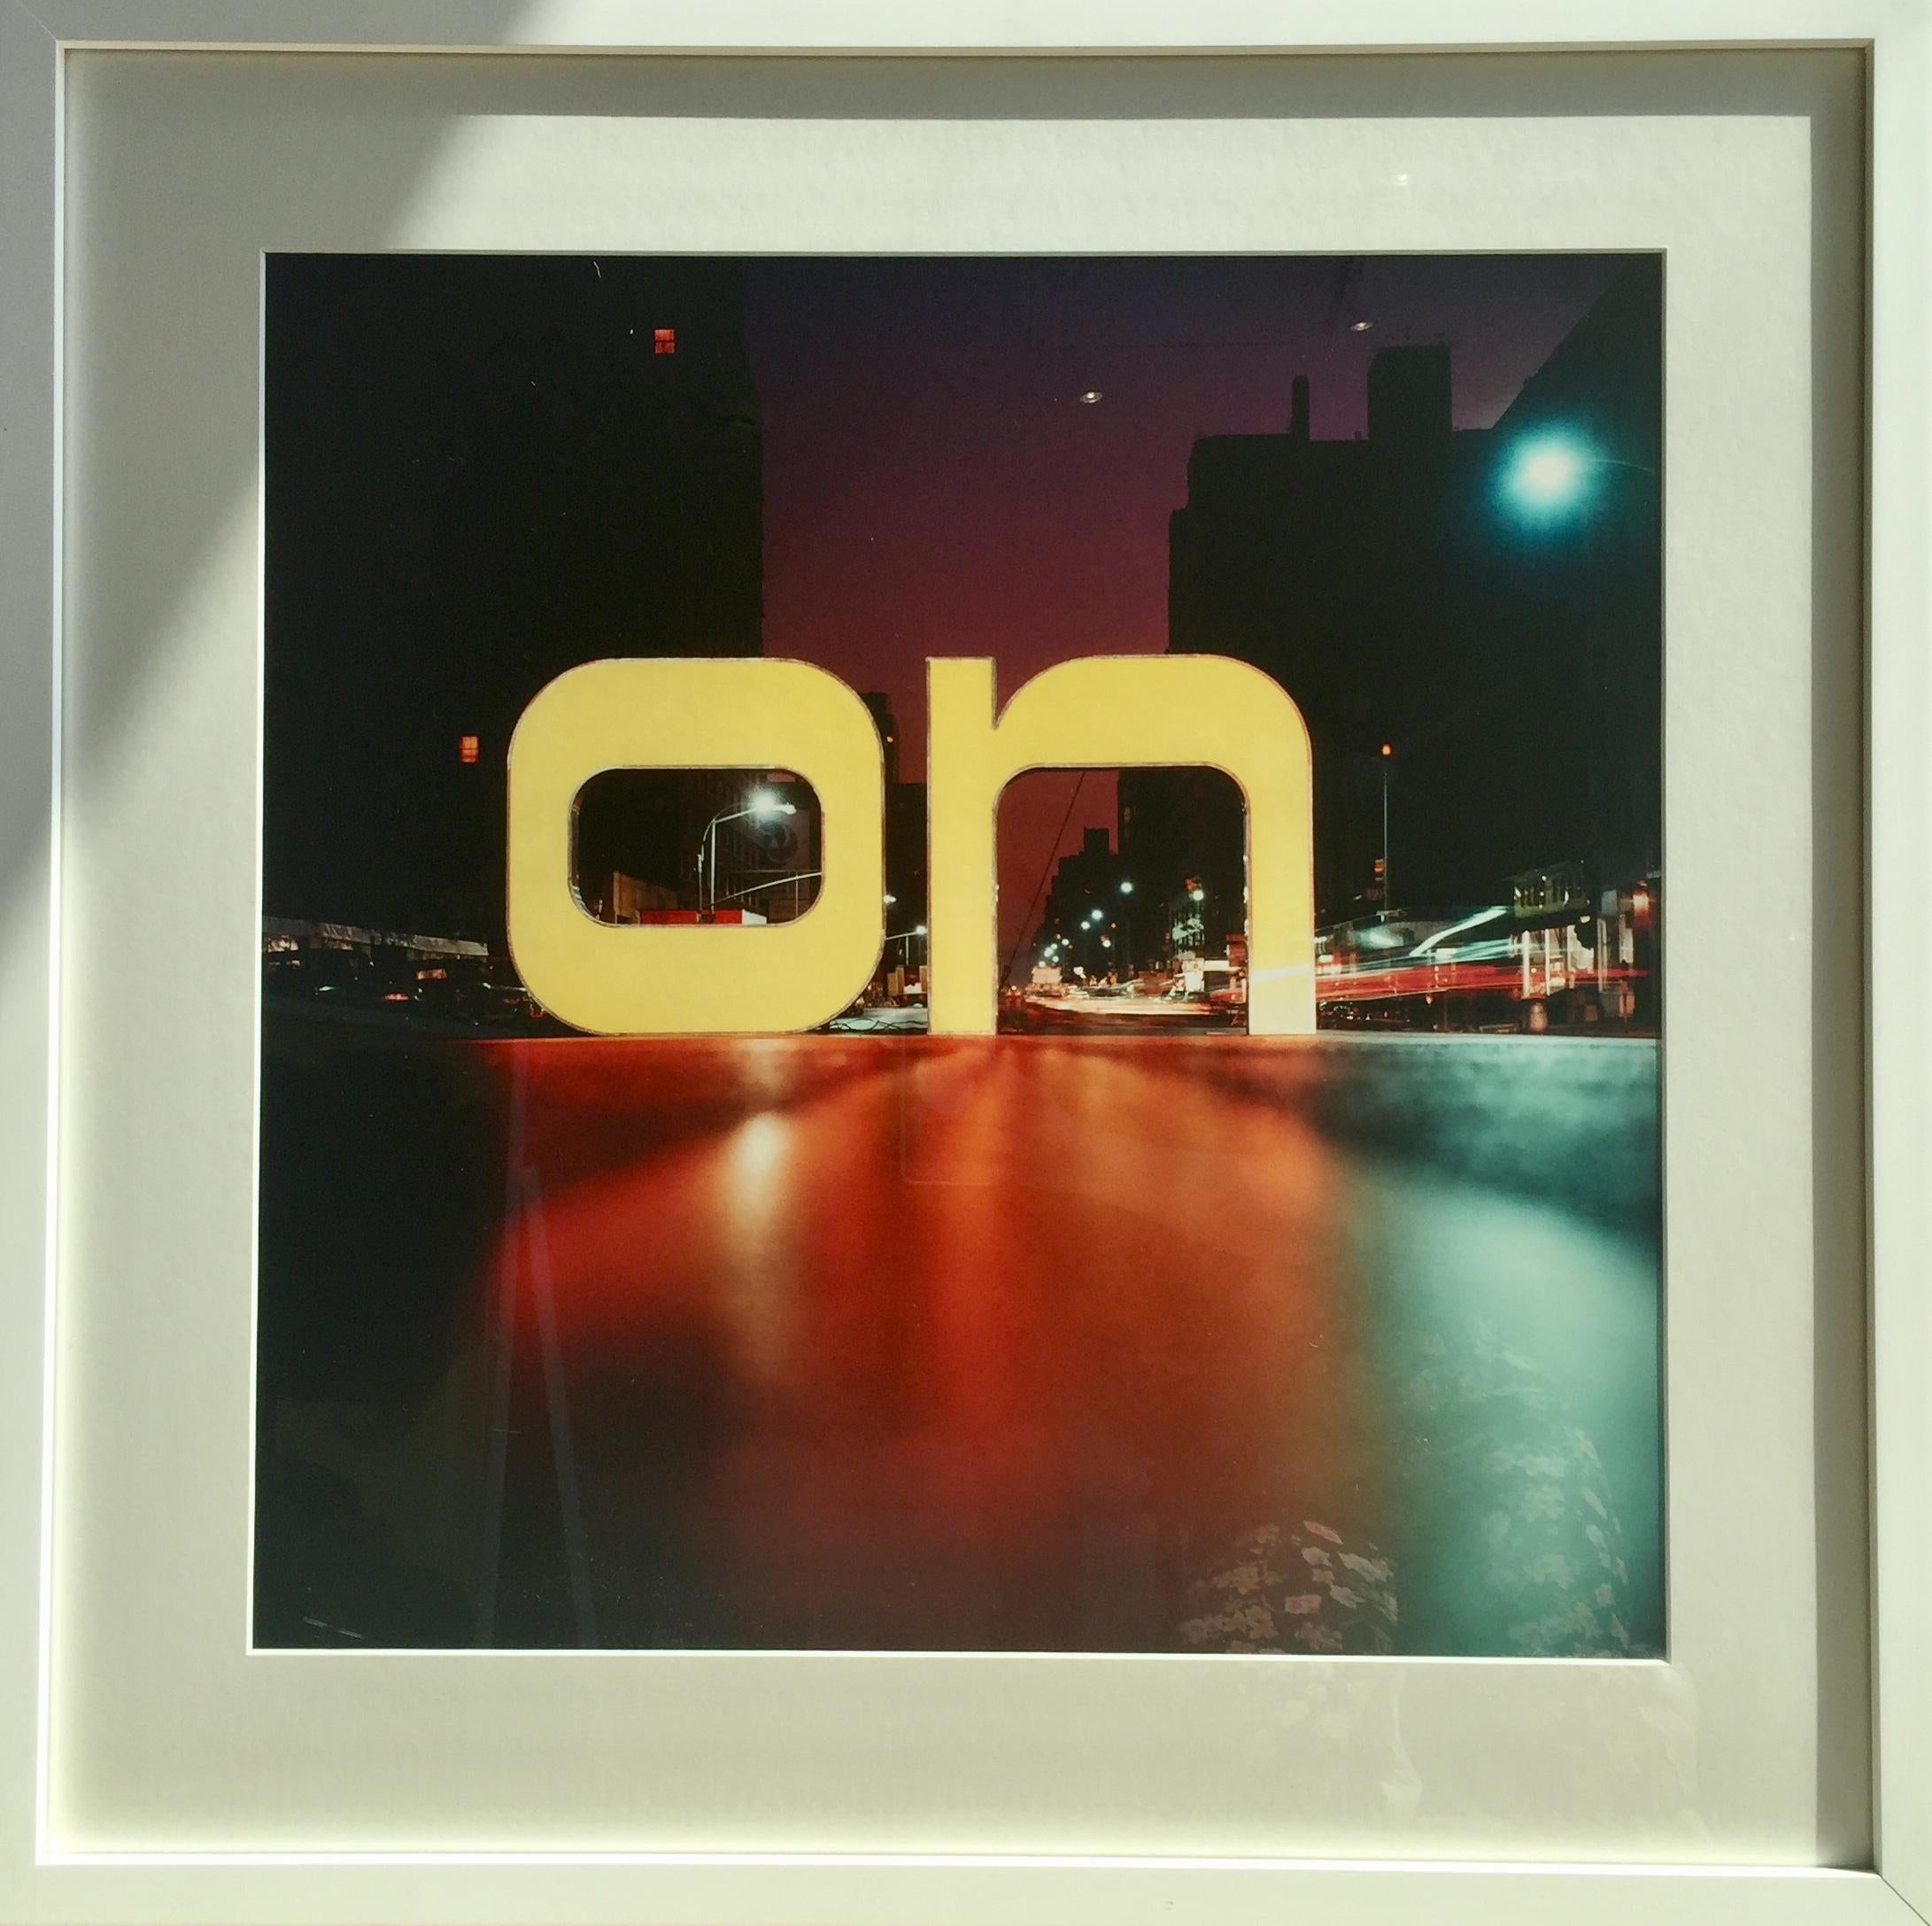 On First Sight, NYC, 1968
Shapes & Symbols, ON, Bright Yellow Lettering
City Photography, New York City Lights, New York at Night, Streetlights 
Archival Pigment Print 
Bert Stern, The Original Mad Man
Photographers of the 20th Century, Mid-Century